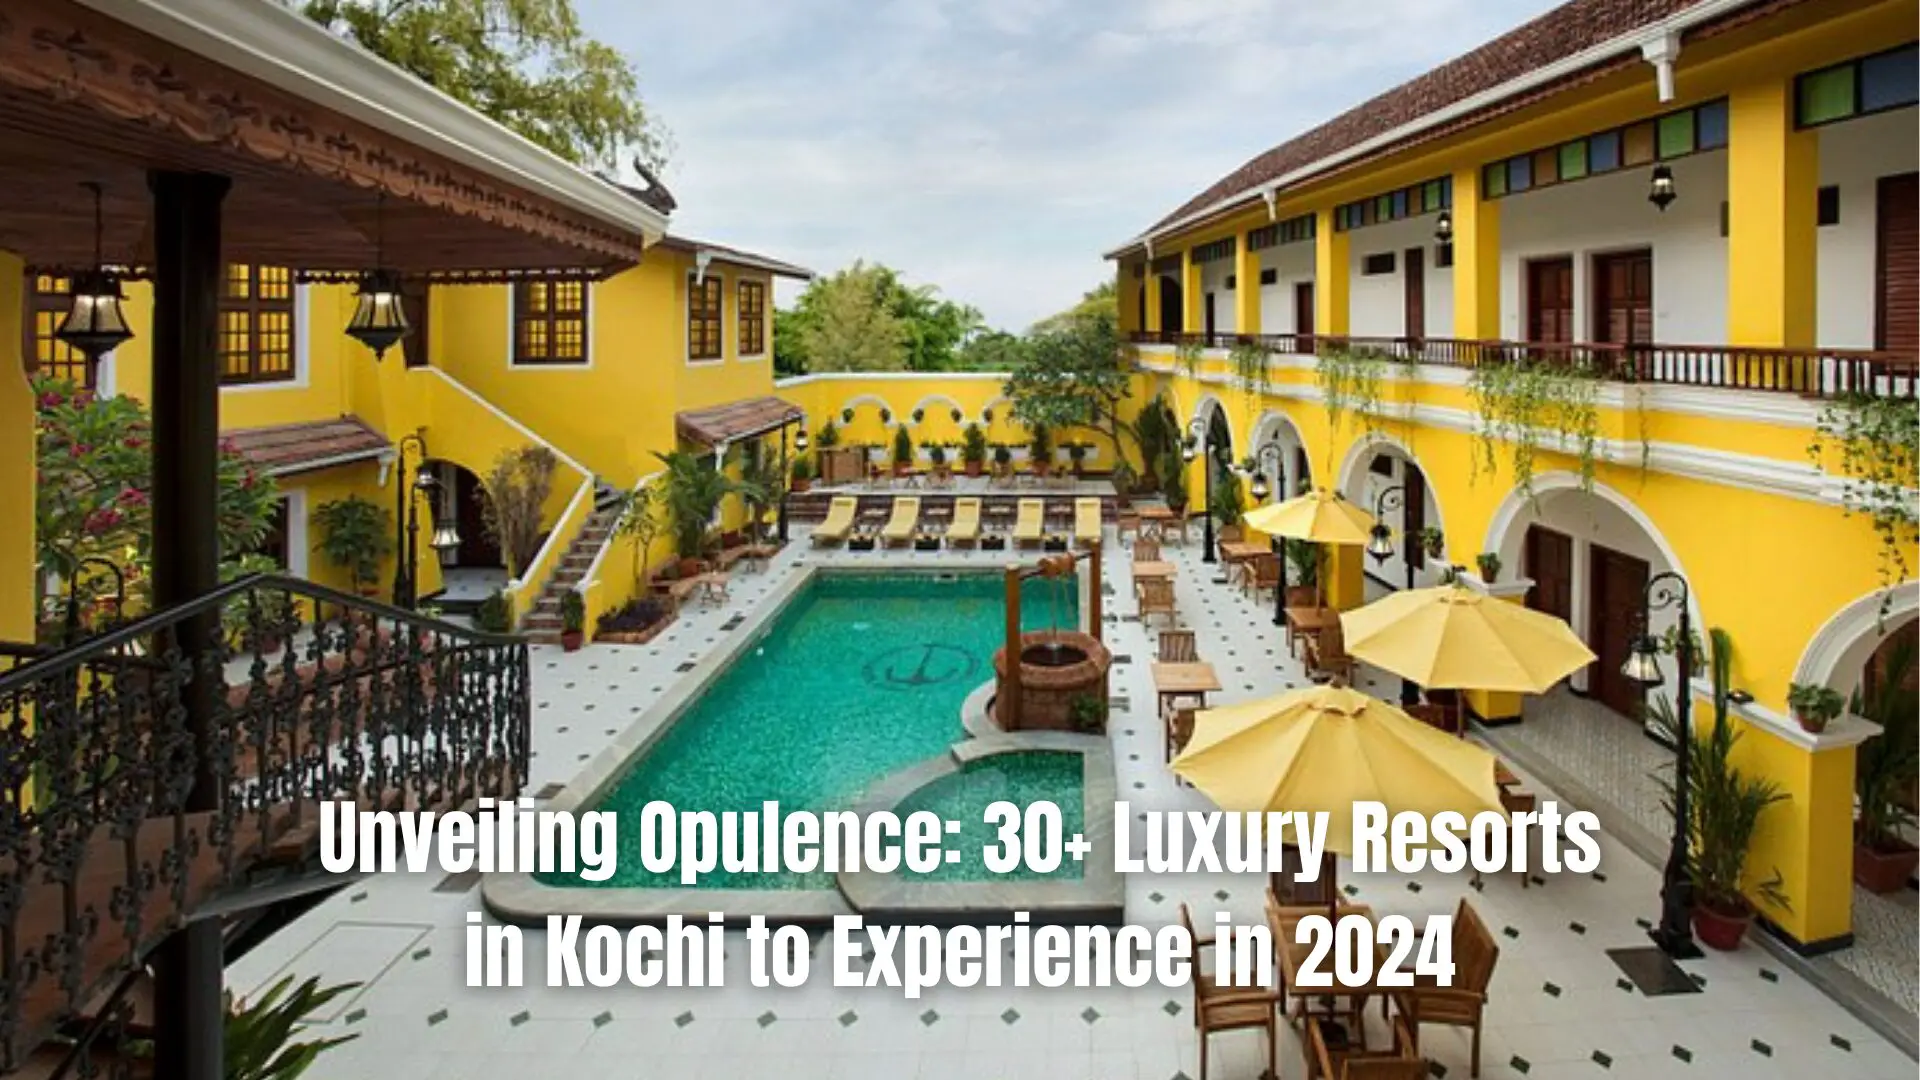 Unveiling Opulence: 30+ Luxury Resorts in Kochi to Experience in 2024